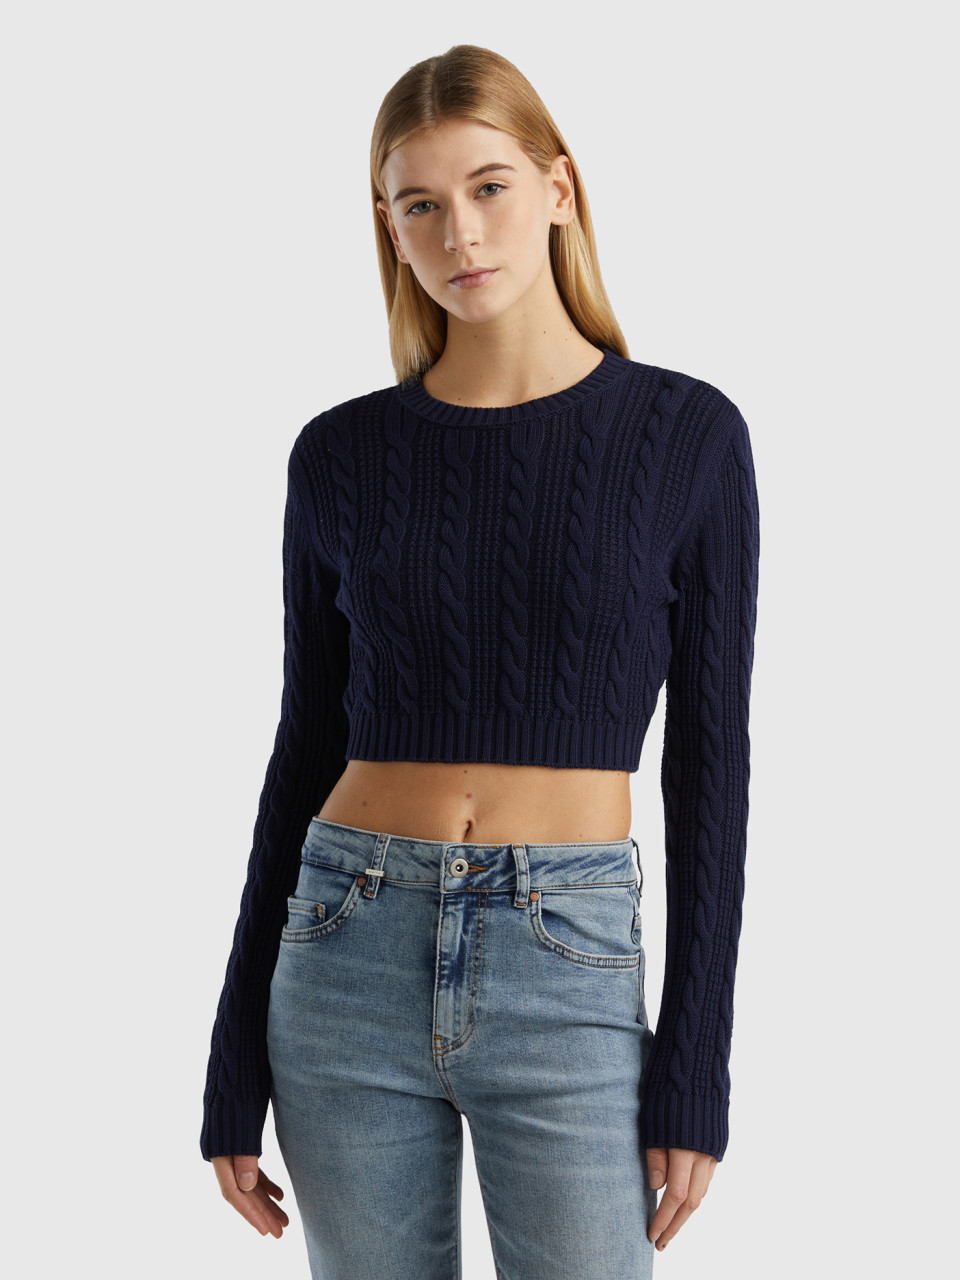 Benetton, Cropped Cable Knit Sweater, Dark Blue, Women